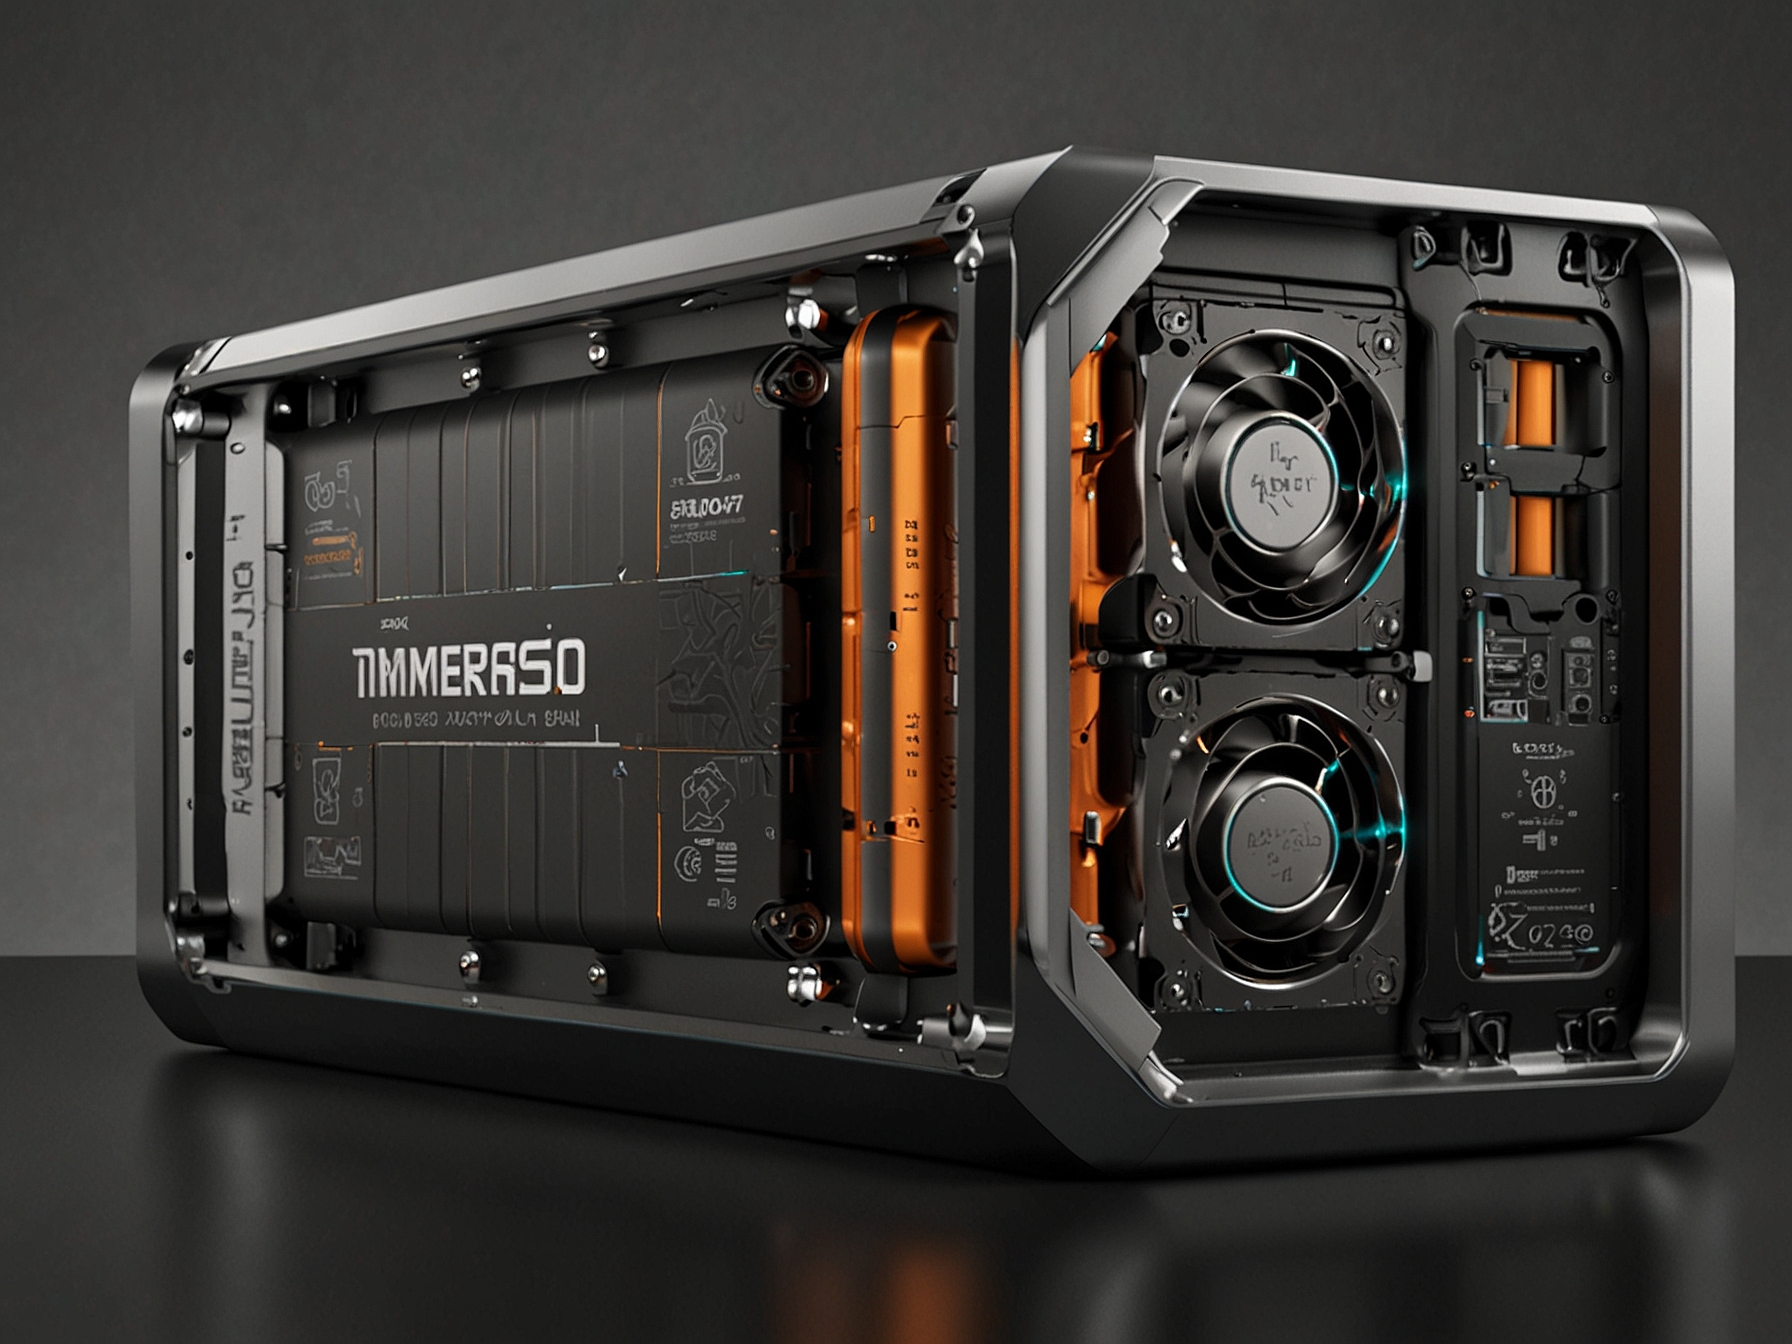 An illustration of the IMMERSIO™ XE50 battery system with detailed cross-sectional views showcasing its advanced immersion cooling technology and compact design.